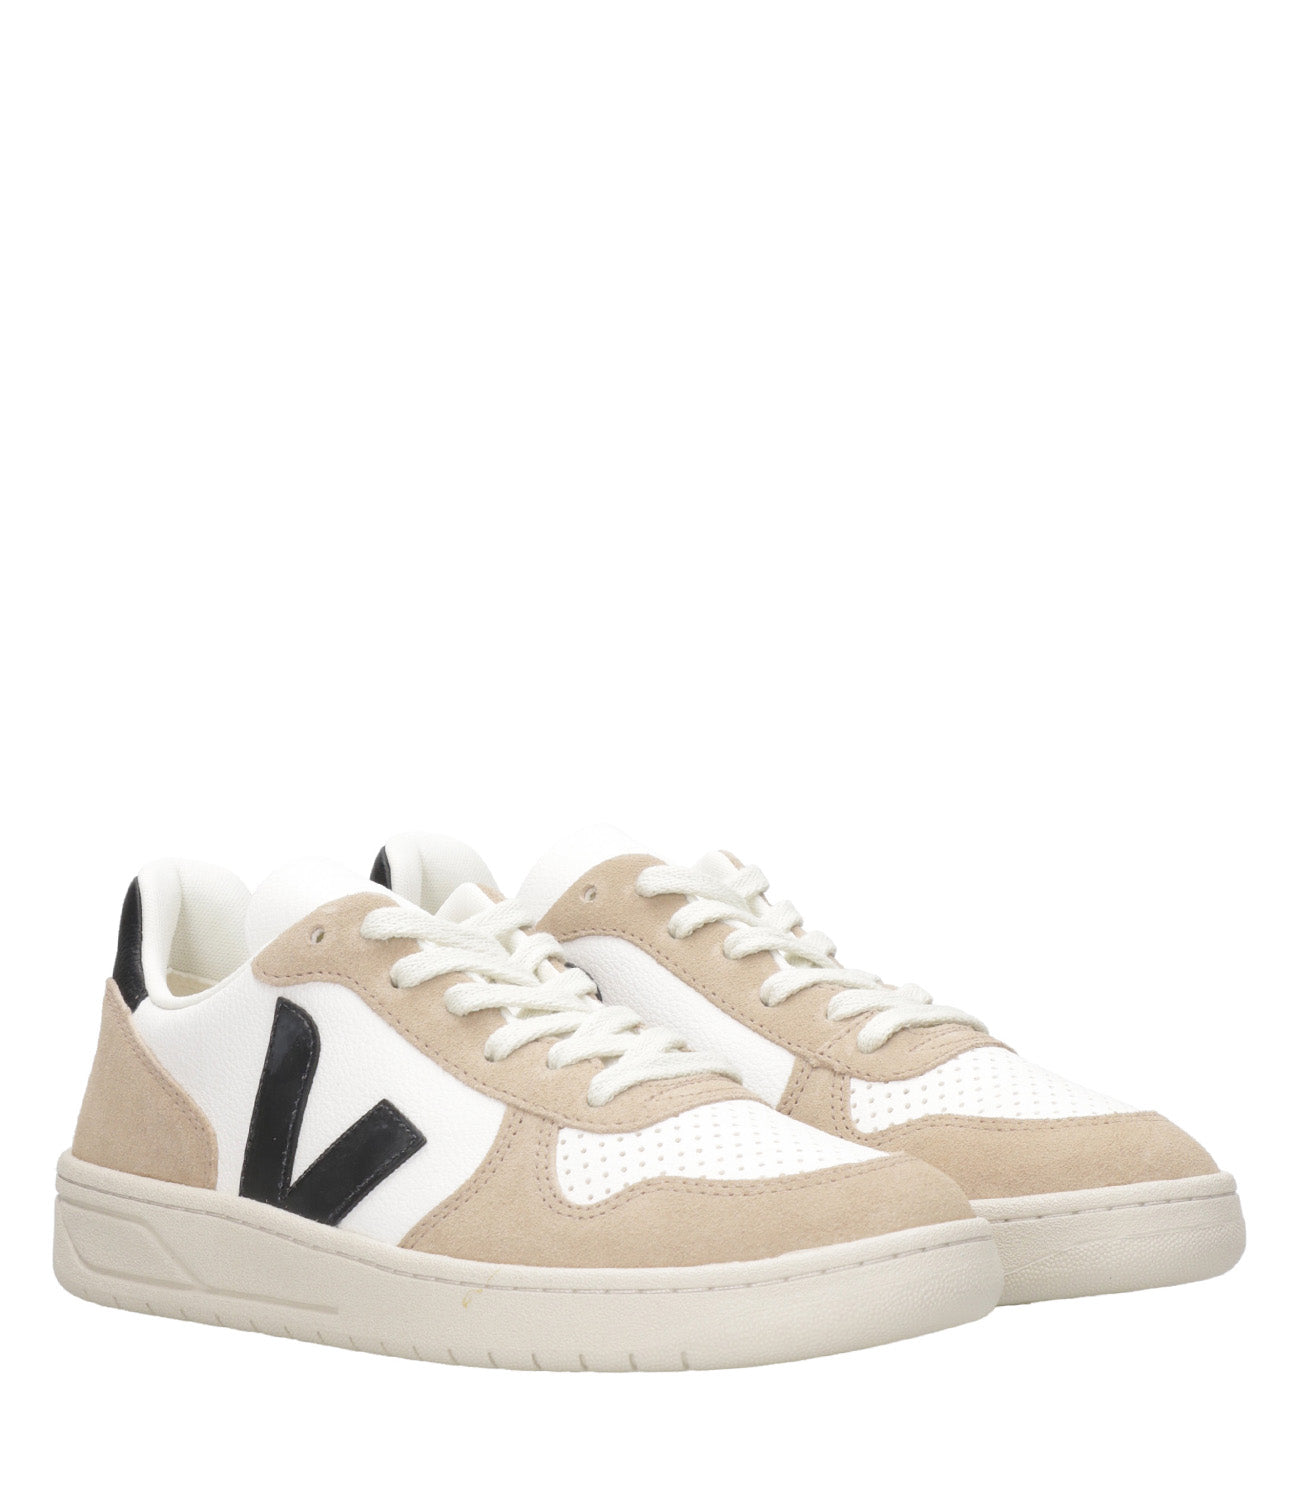 Veja | Black and White Sneakers